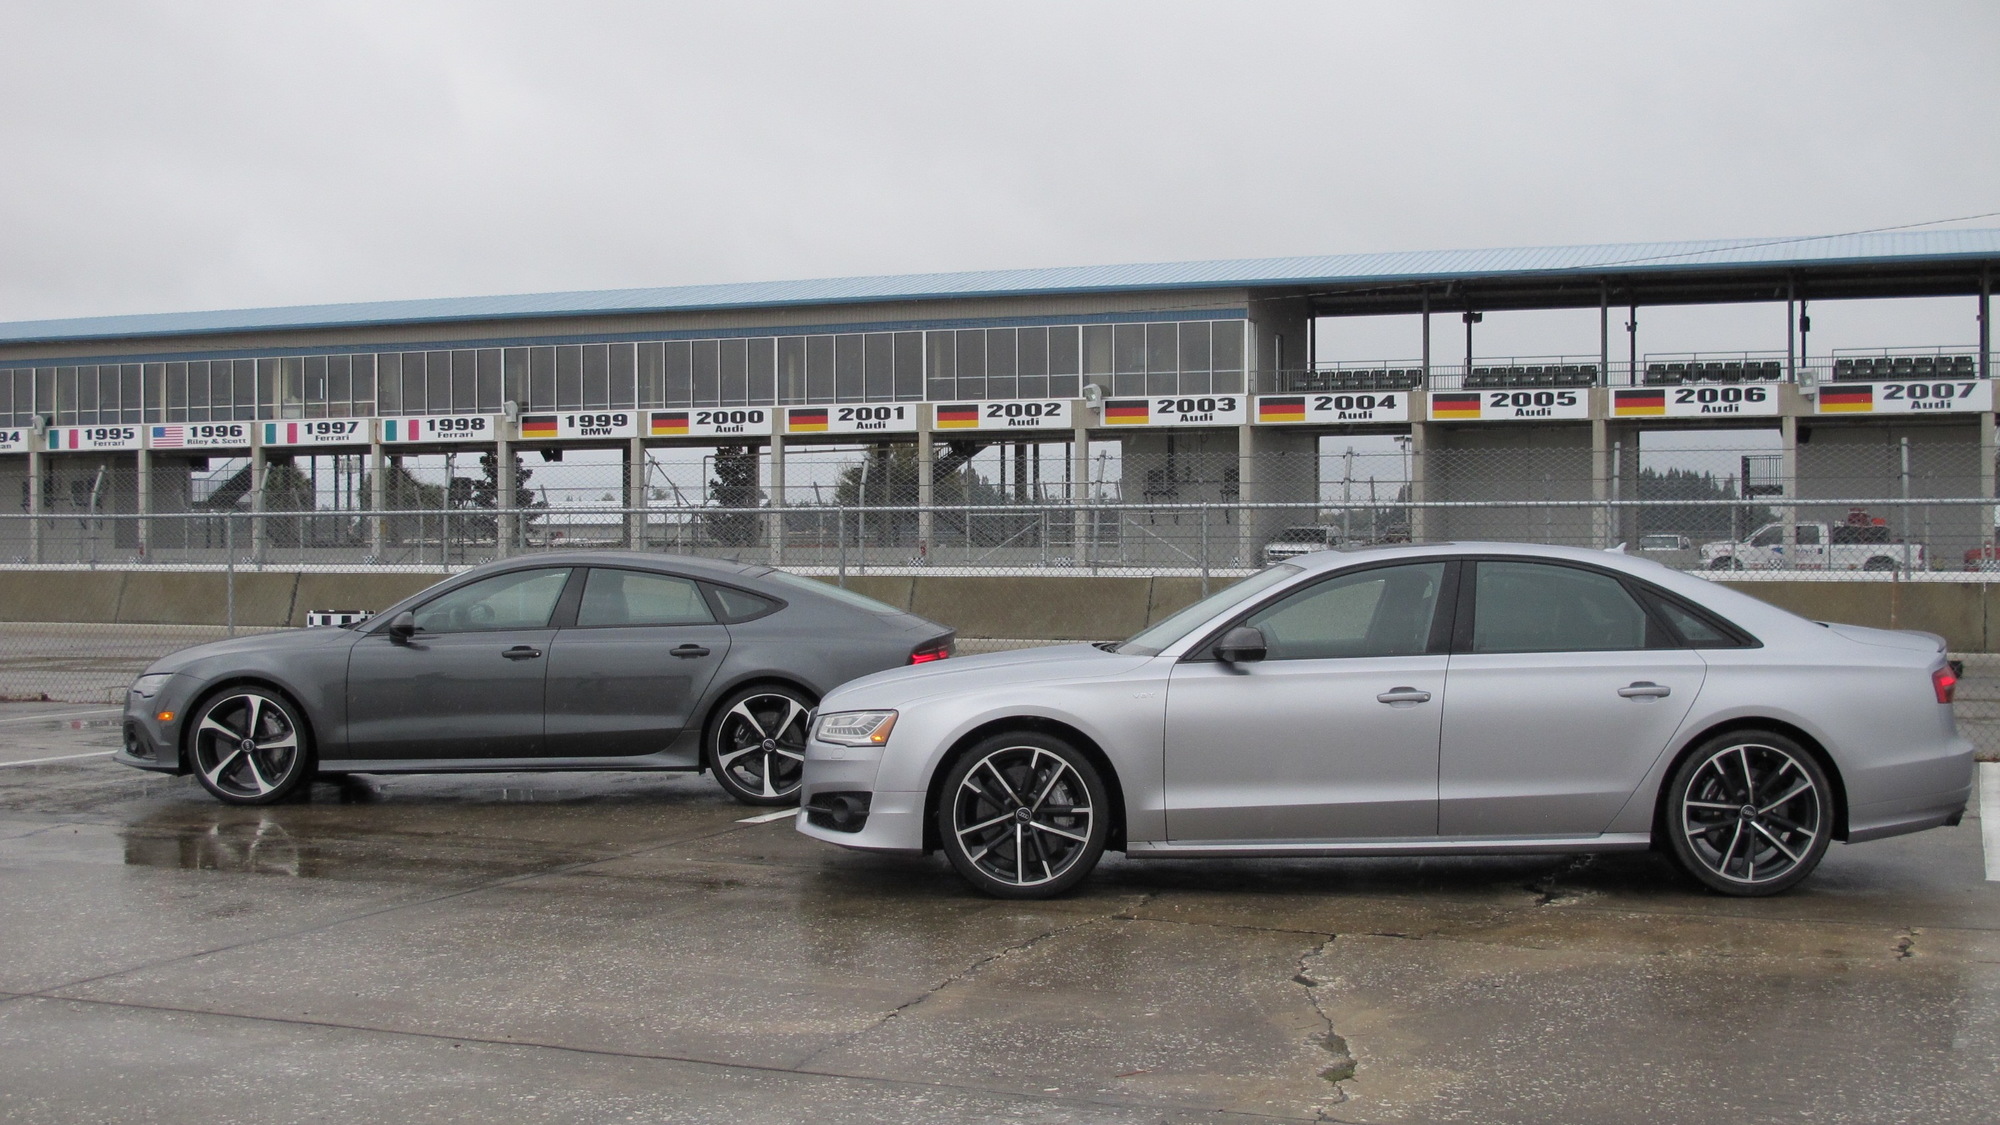 2016 Audi RS 7 Performance and S8 Plus, Sebring 2016